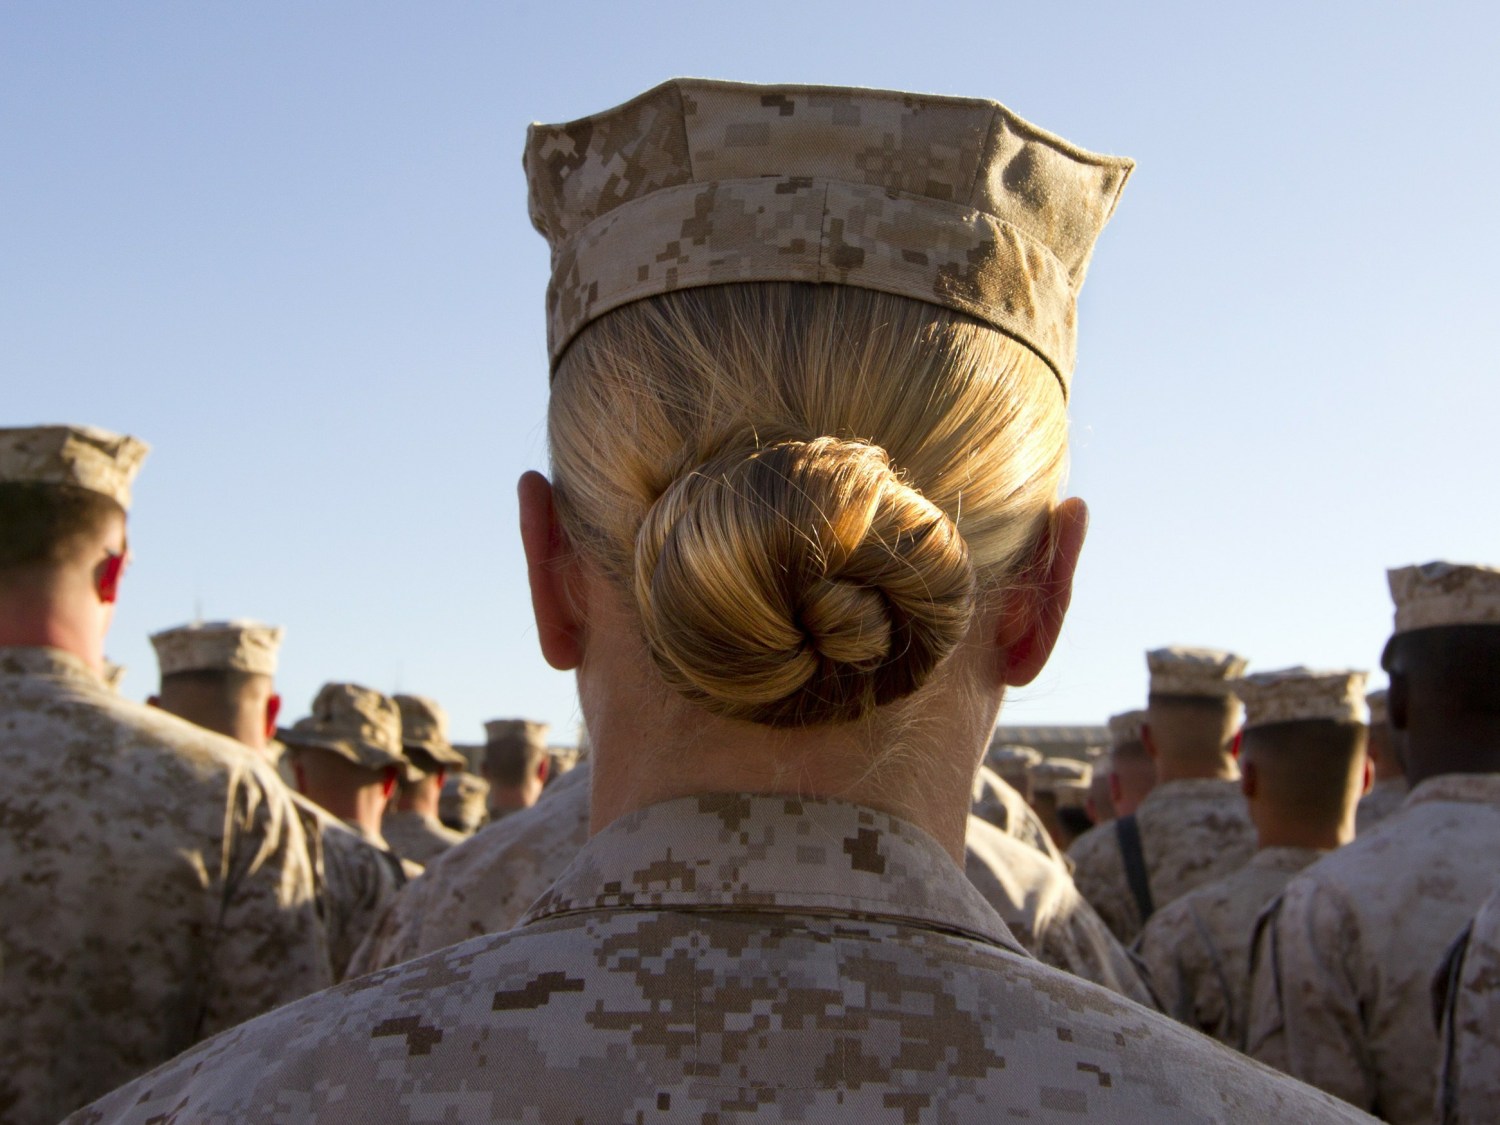 Female Military Uniform Porn - Nude Photo Posts of Female Marines Being Investigated by NCIS